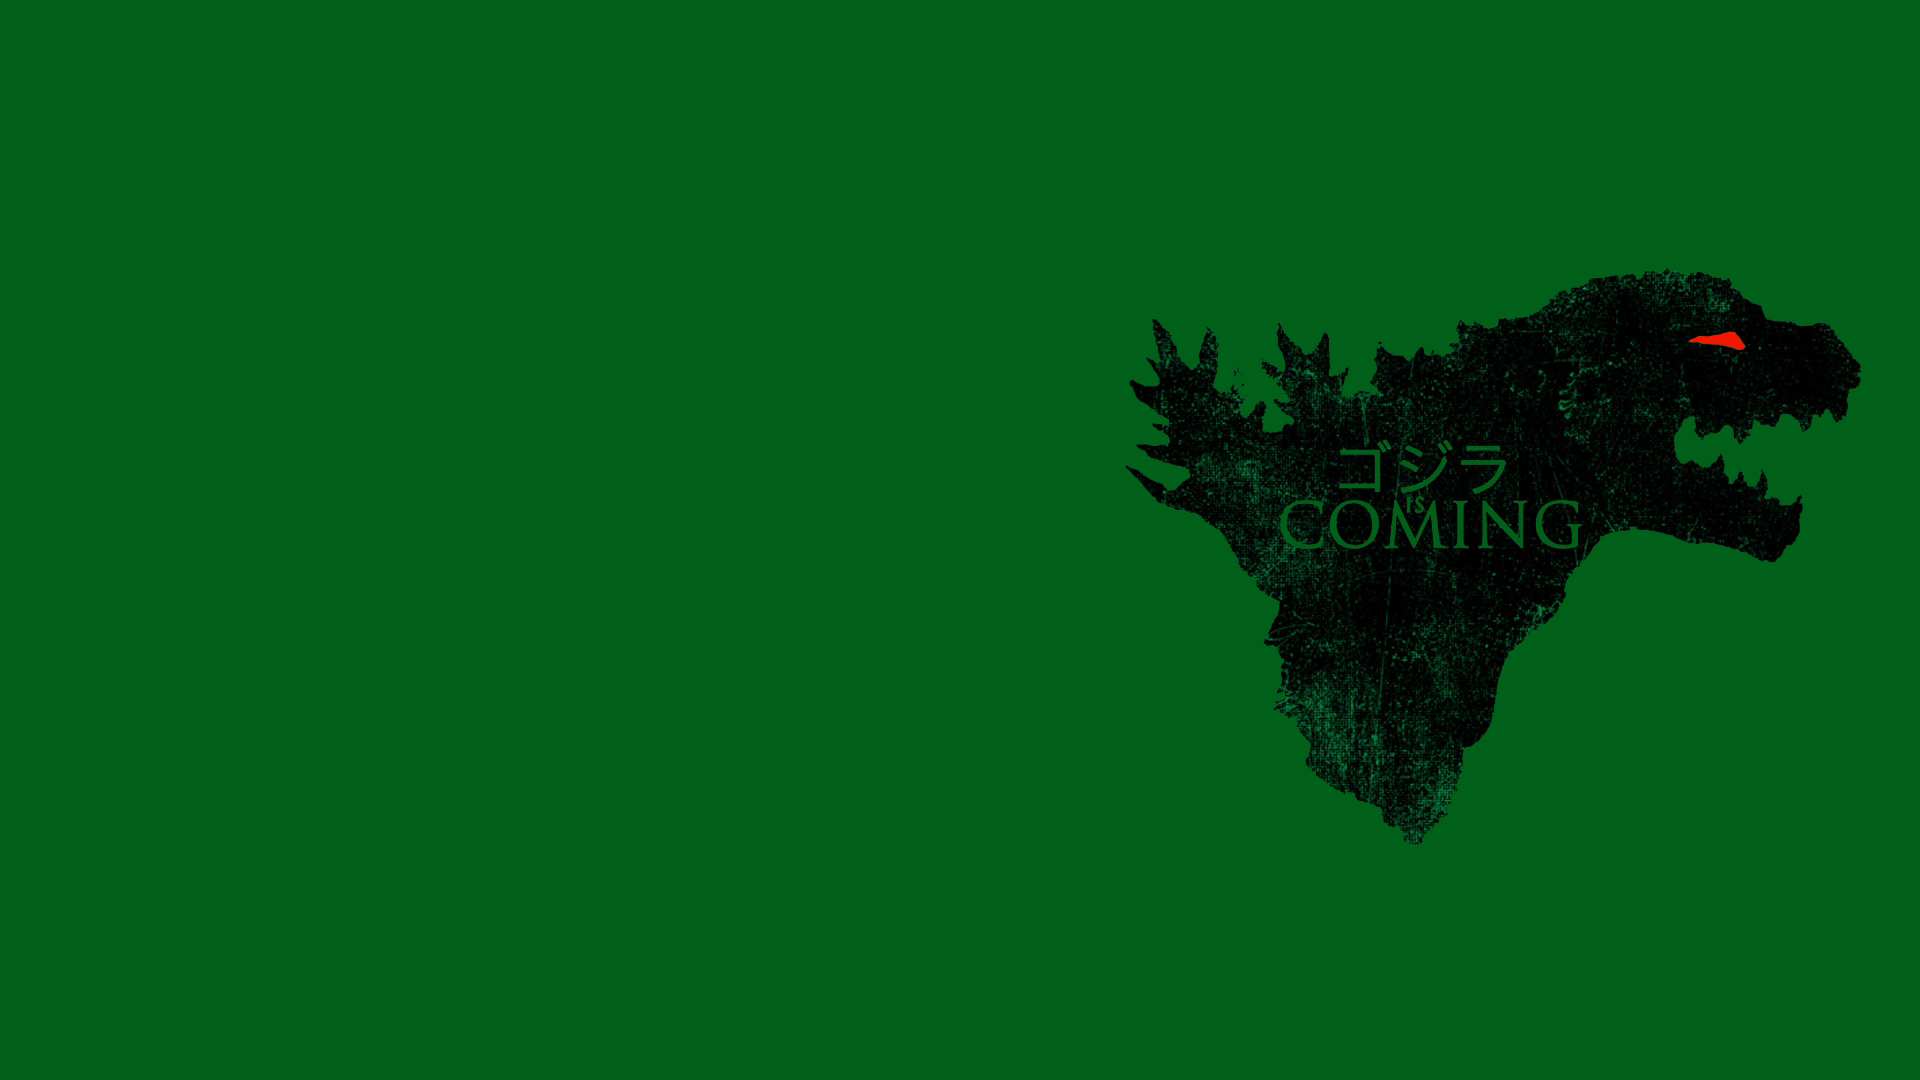 Godzilla Wallpaper With Red Eye With Green Wallpaper 2K Movies